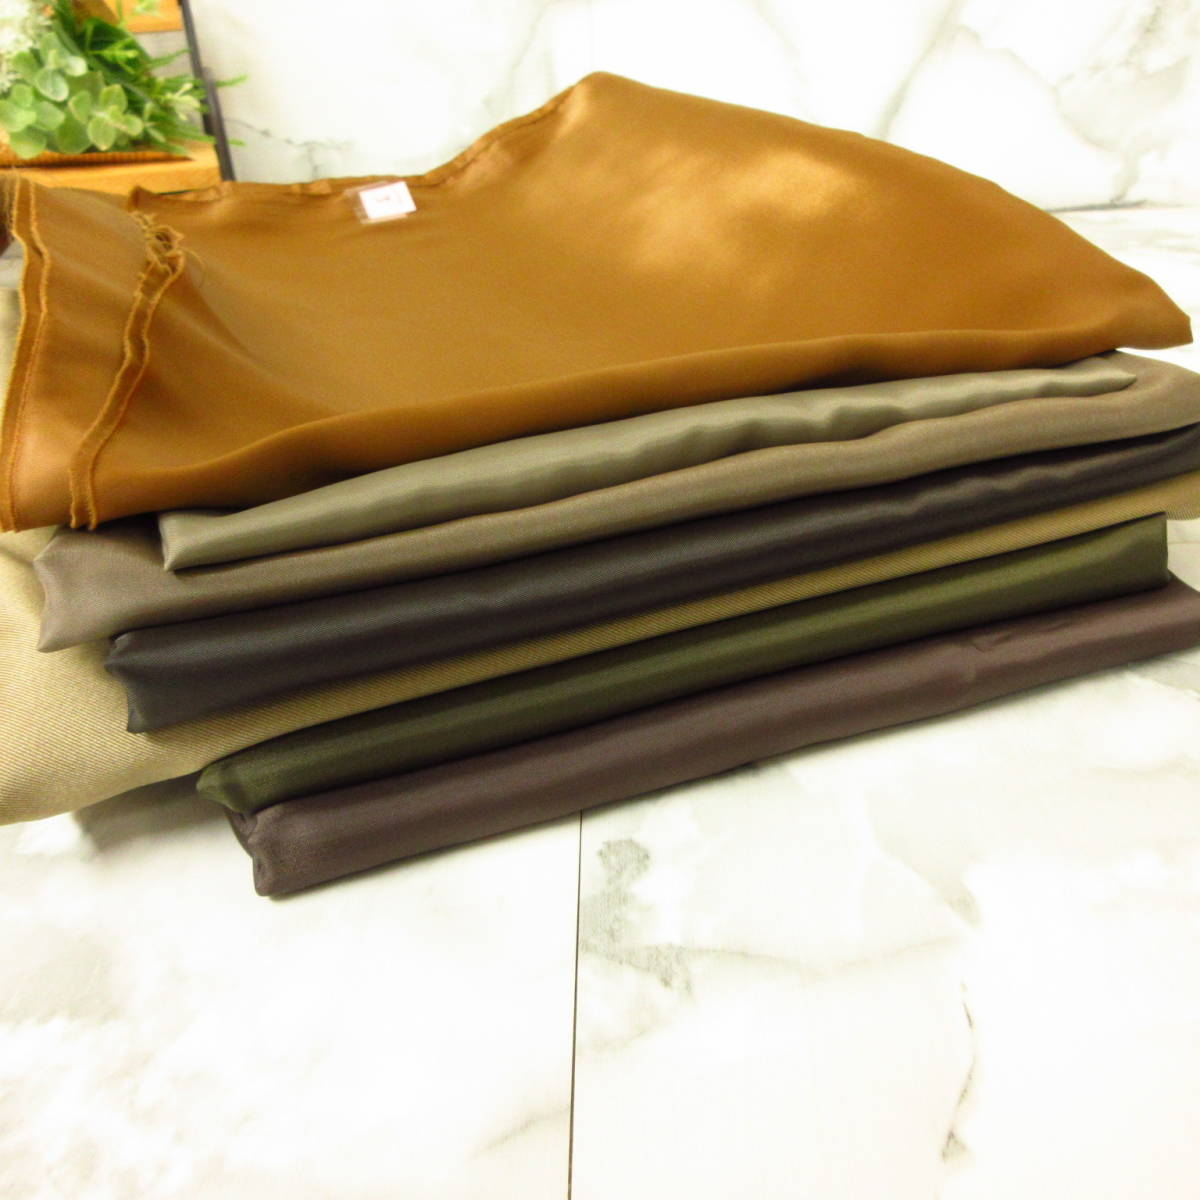 21.1m* prompt decision price *1m per 100 jpy * made in Japan polyester lining *7 sheets assortment lucky bag * light brown group mix* handicrafts dressmaking hand made * translation have B goods outlet *B